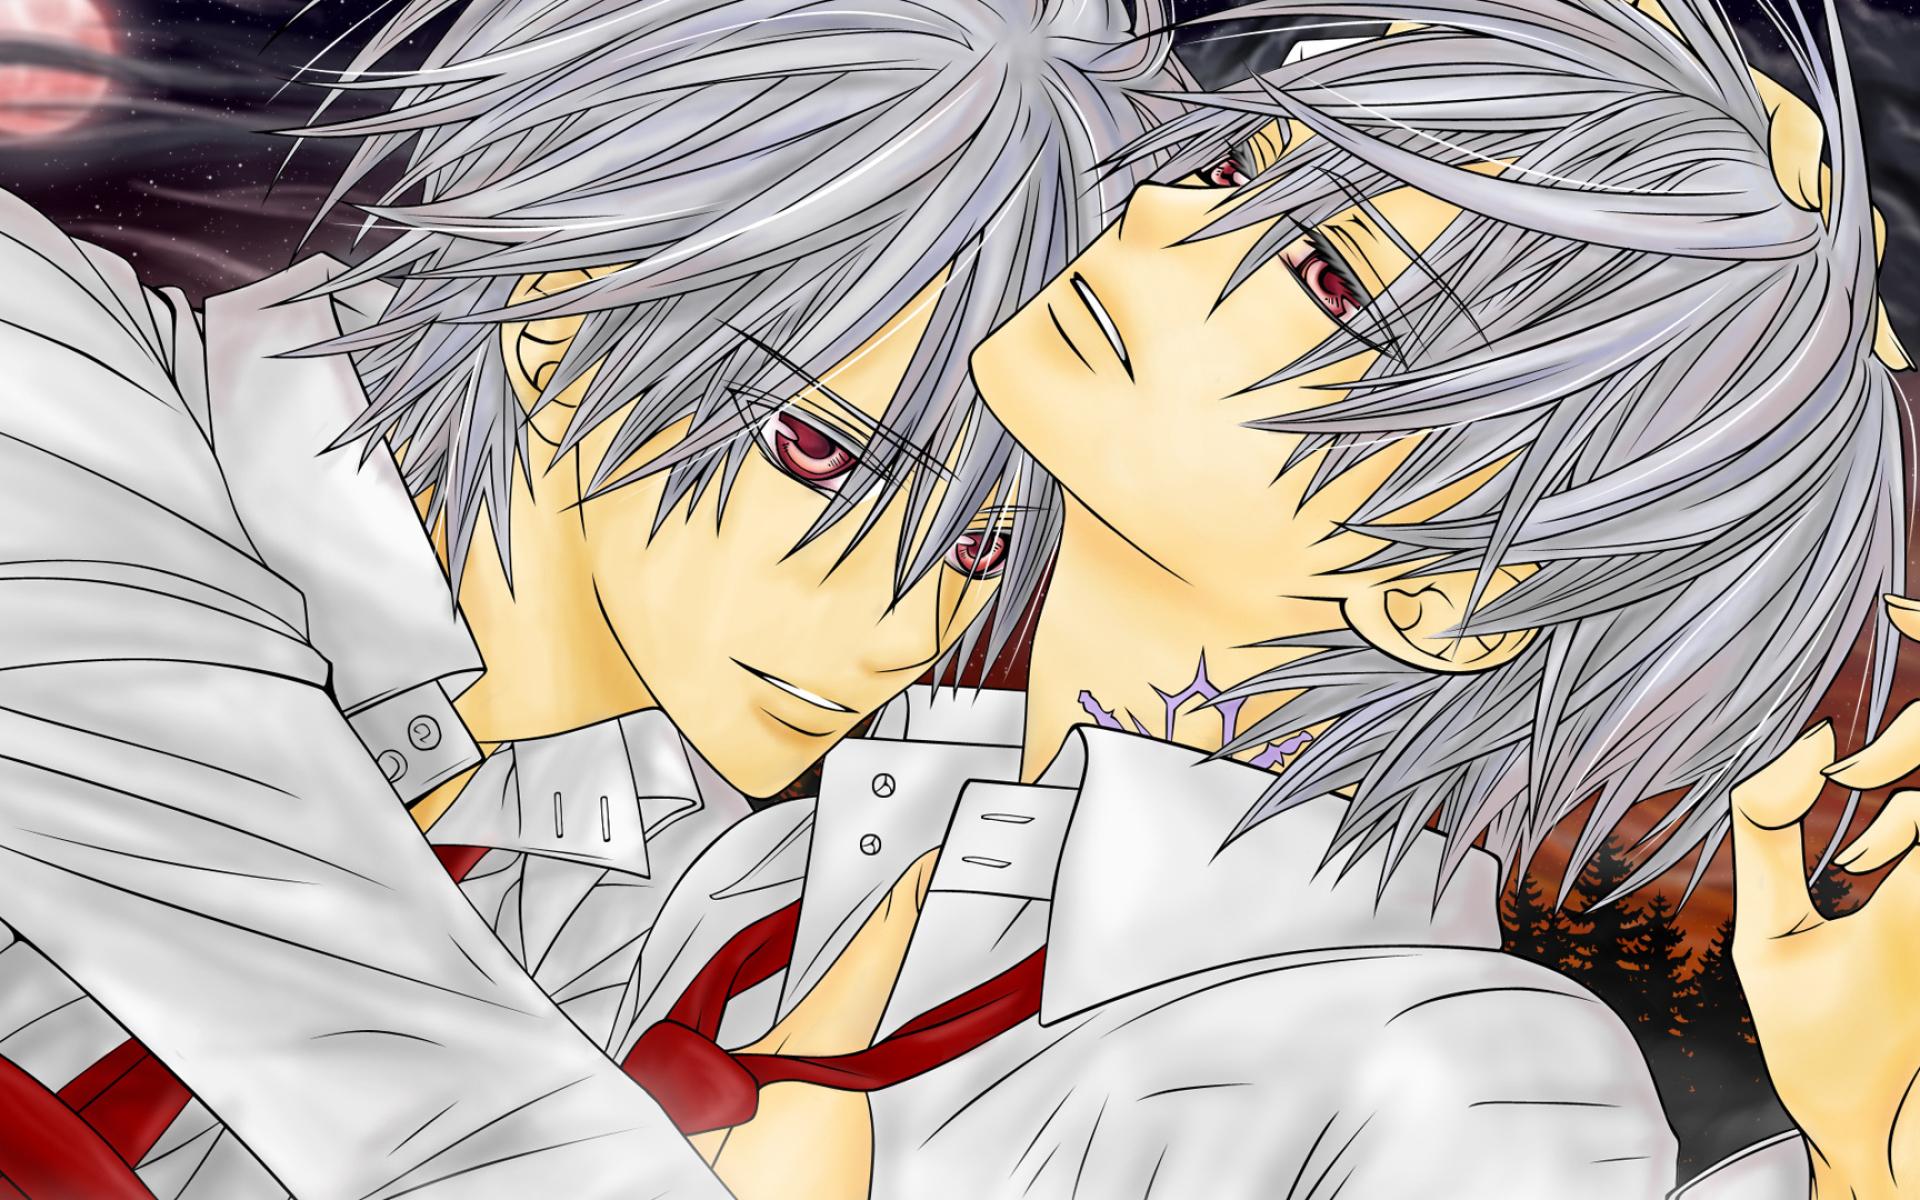 1920x1200 140+ Vampire Knight HD Wallpapers and Backgrounds